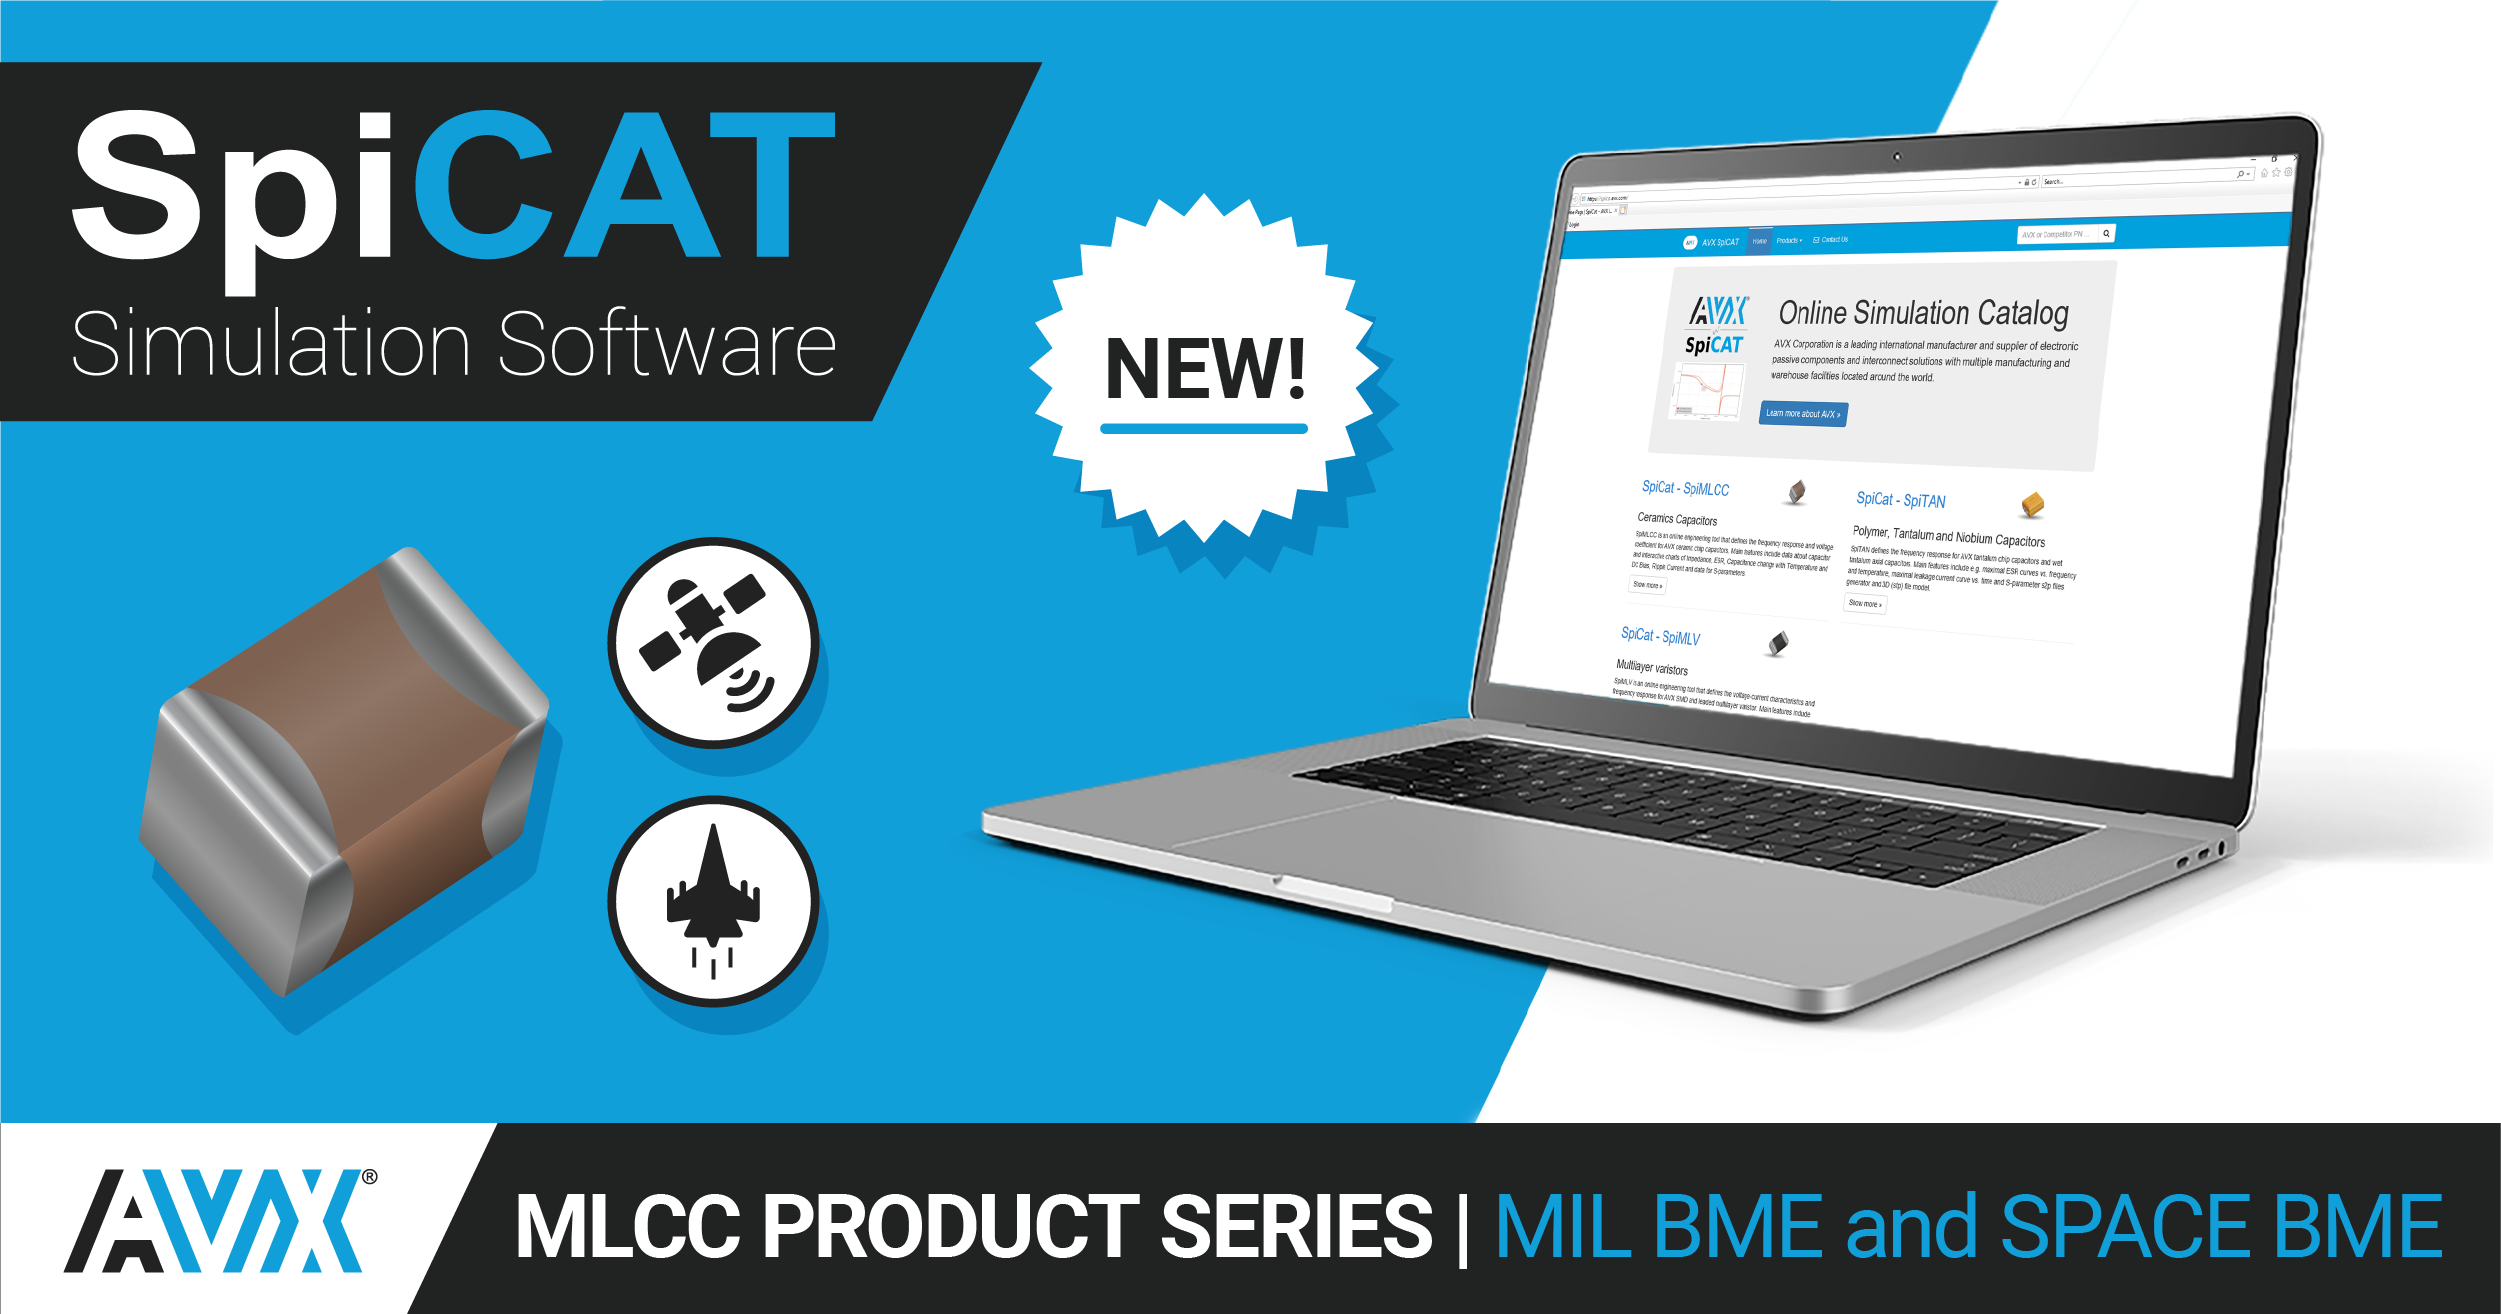 AVX Updates its SpiCAT Online Simulation Tool with New MLCC Product Series